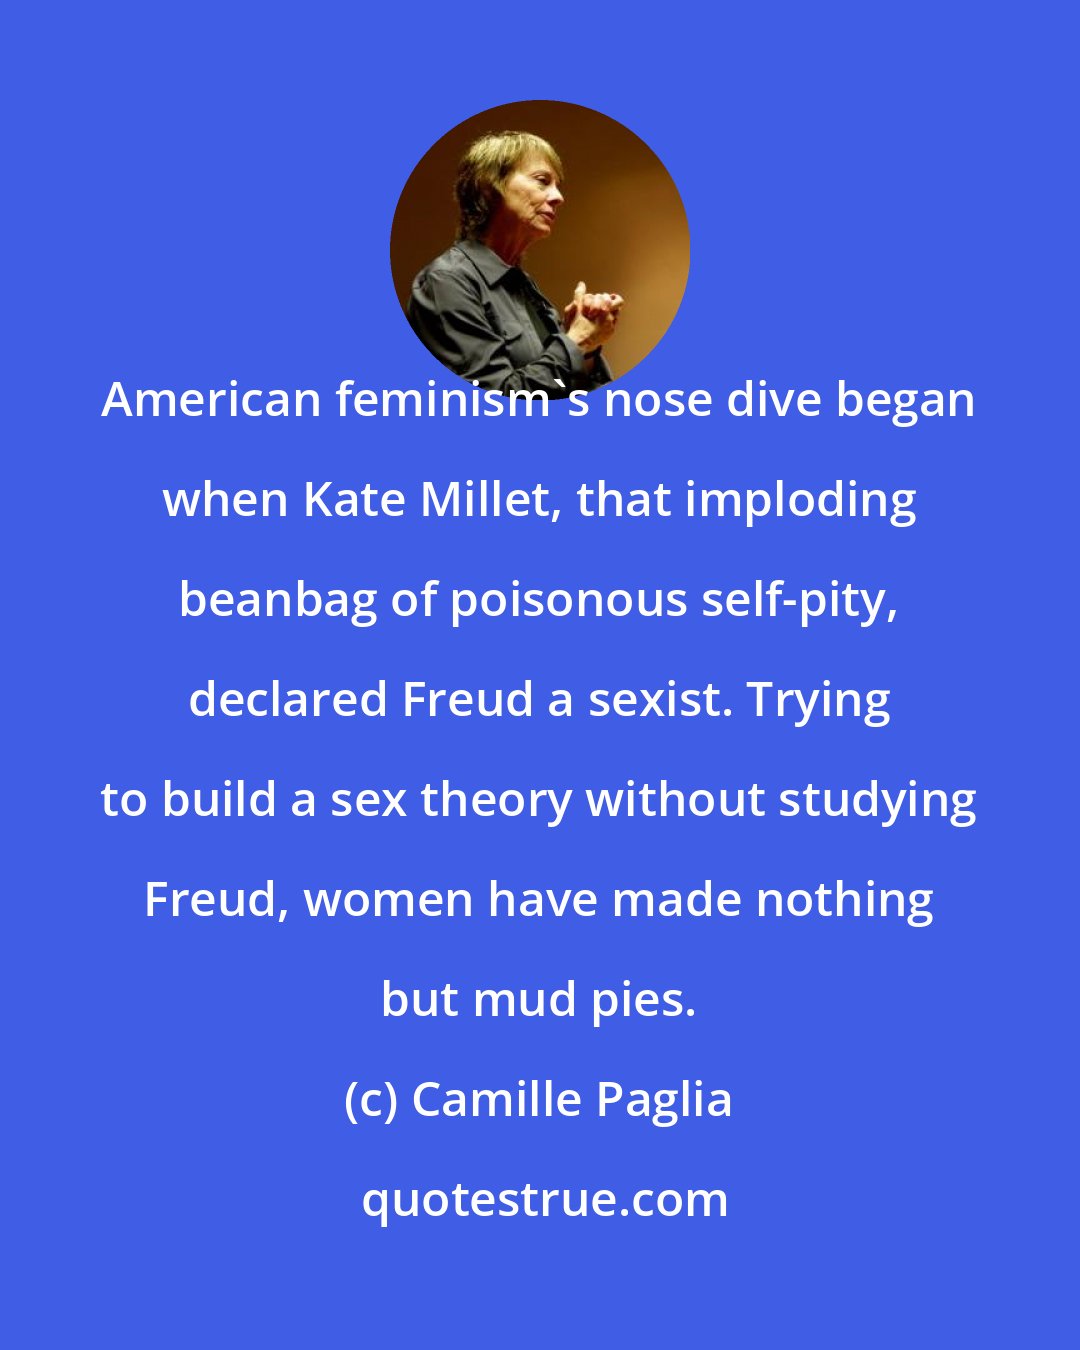 Camille Paglia: American feminism's nose dive began when Kate Millet, that imploding beanbag of poisonous self-pity, declared Freud a sexist. Trying to build a sex theory without studying Freud, women have made nothing but mud pies.